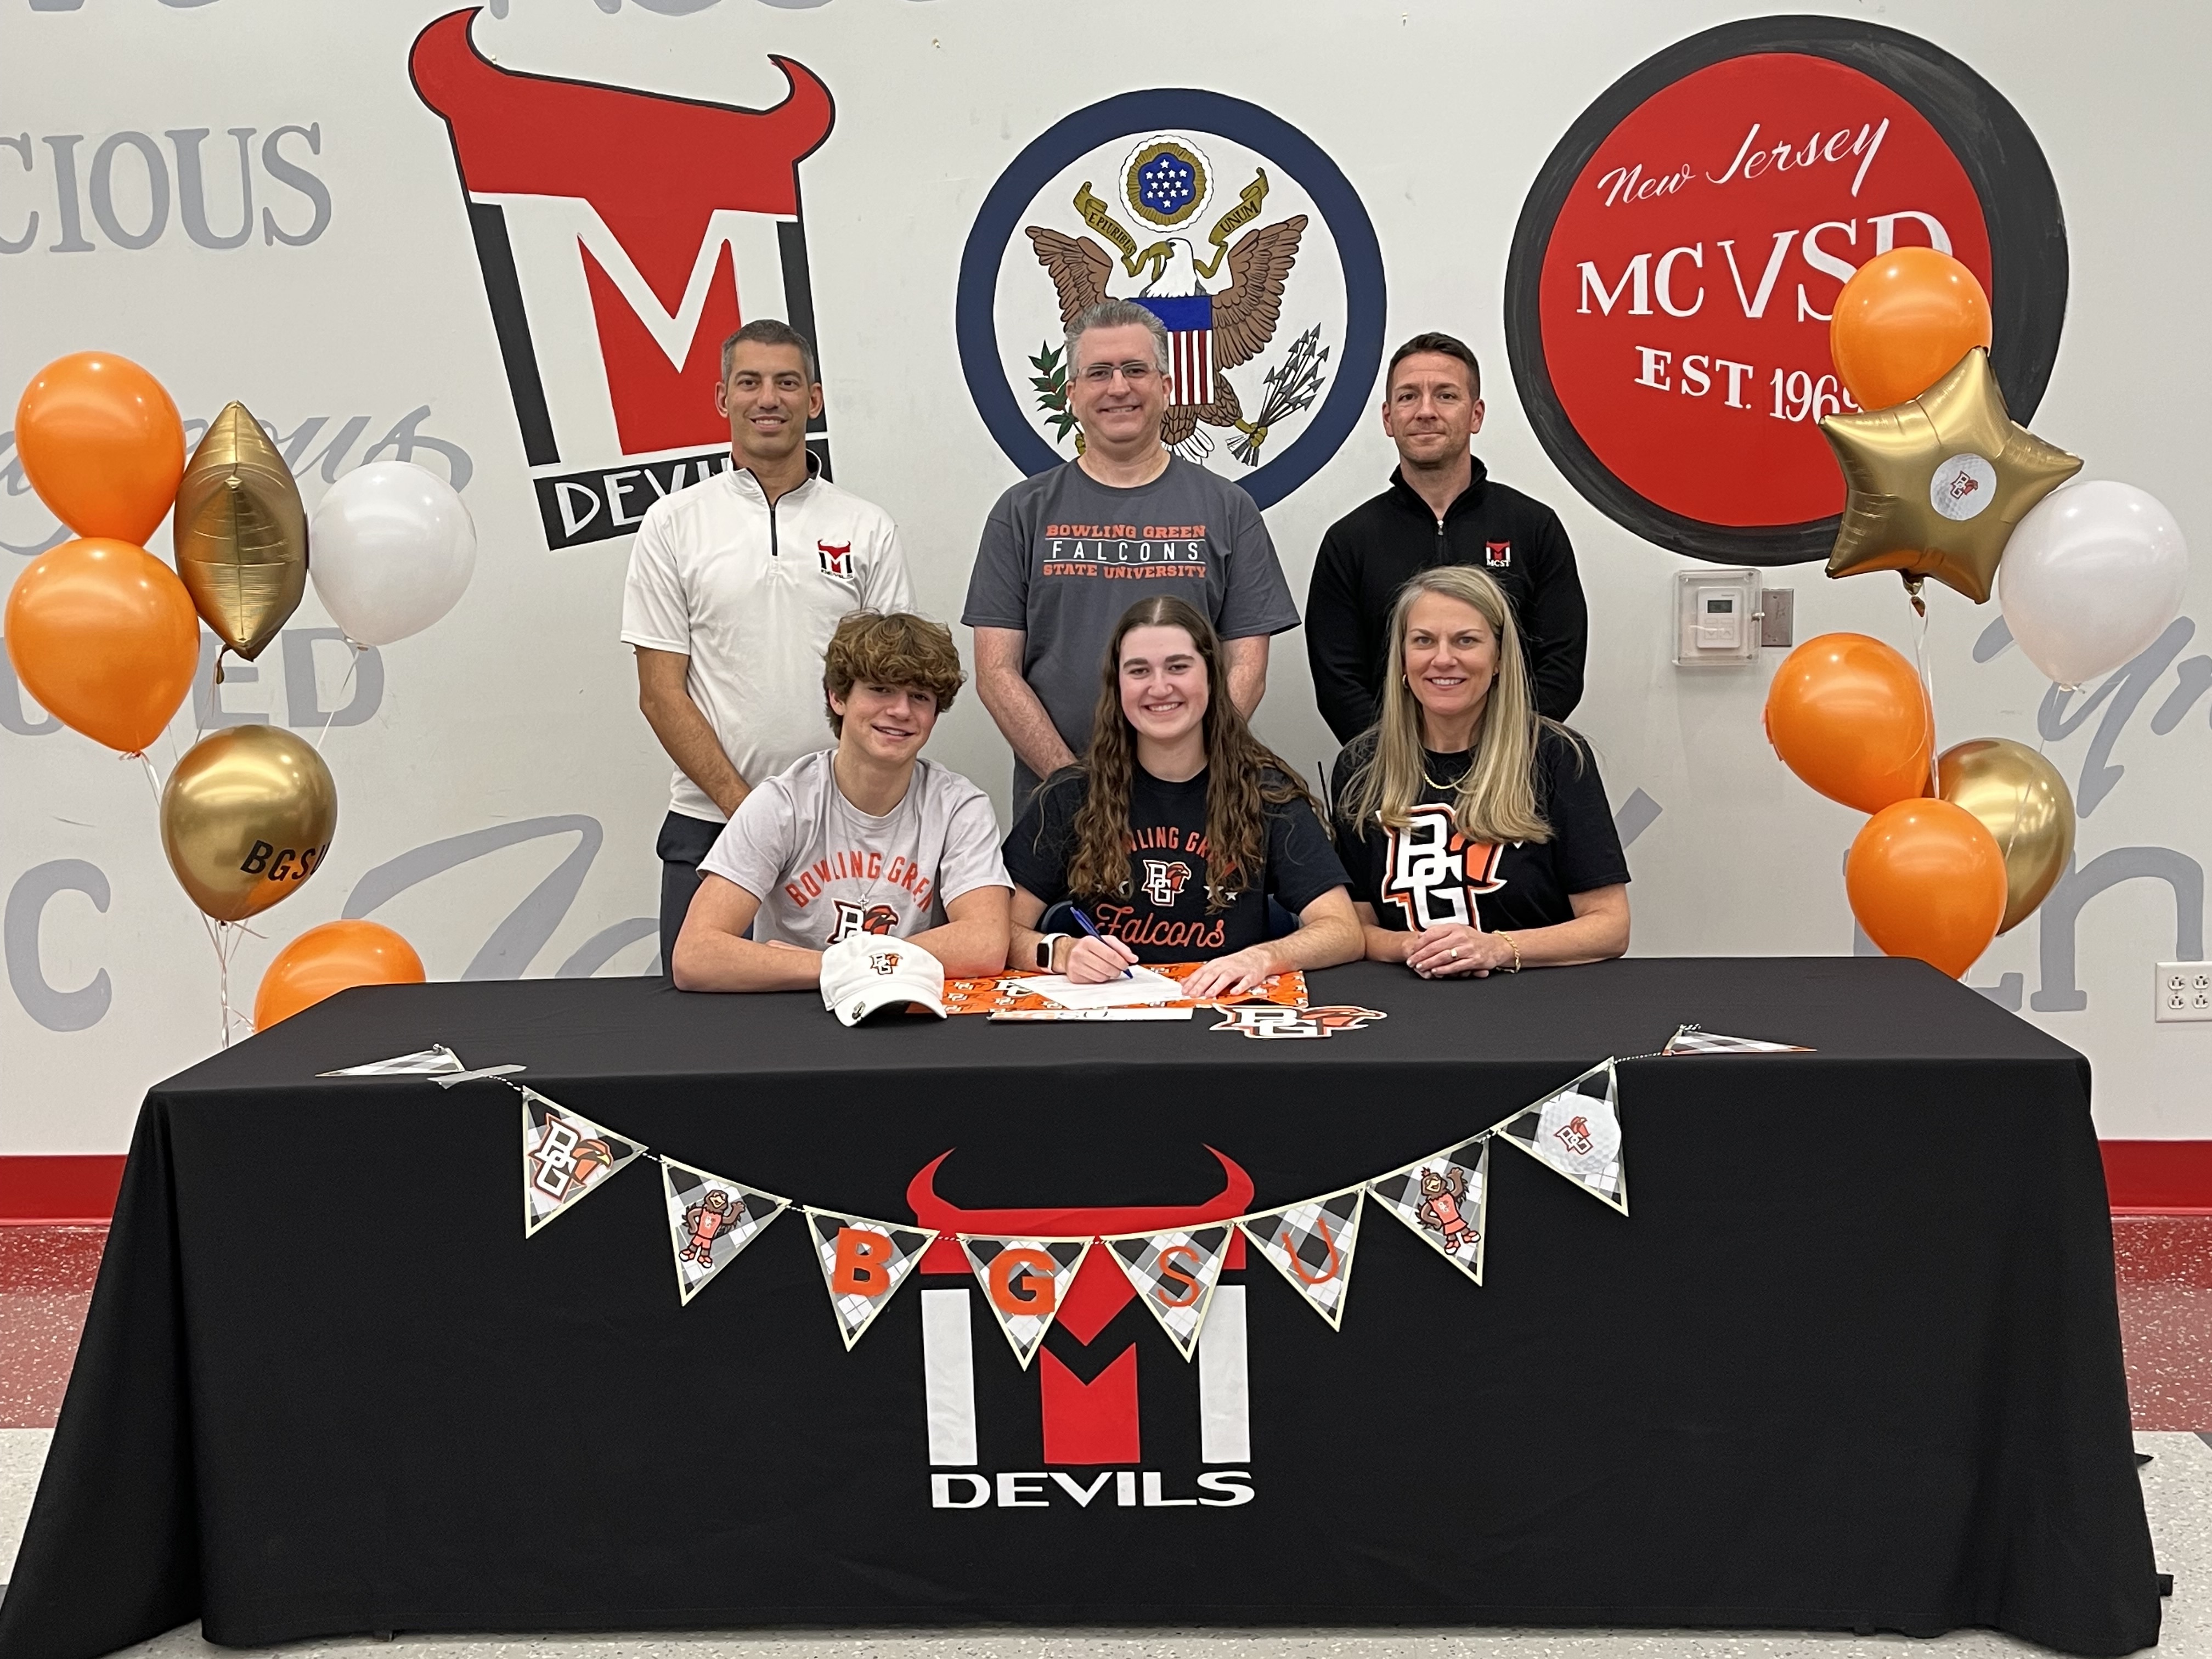 Samantha Dolce will be attending Bowling Green University on a golf scholarship.
Pictured in the front (L to R):
Andrew Dolce (brother), Samantha Dolce, Amy Dolce (mother)
Pictured in the back (L to R):
AJ Prentice (coach), Michael Dolce (father), Mark Menadier (AD)